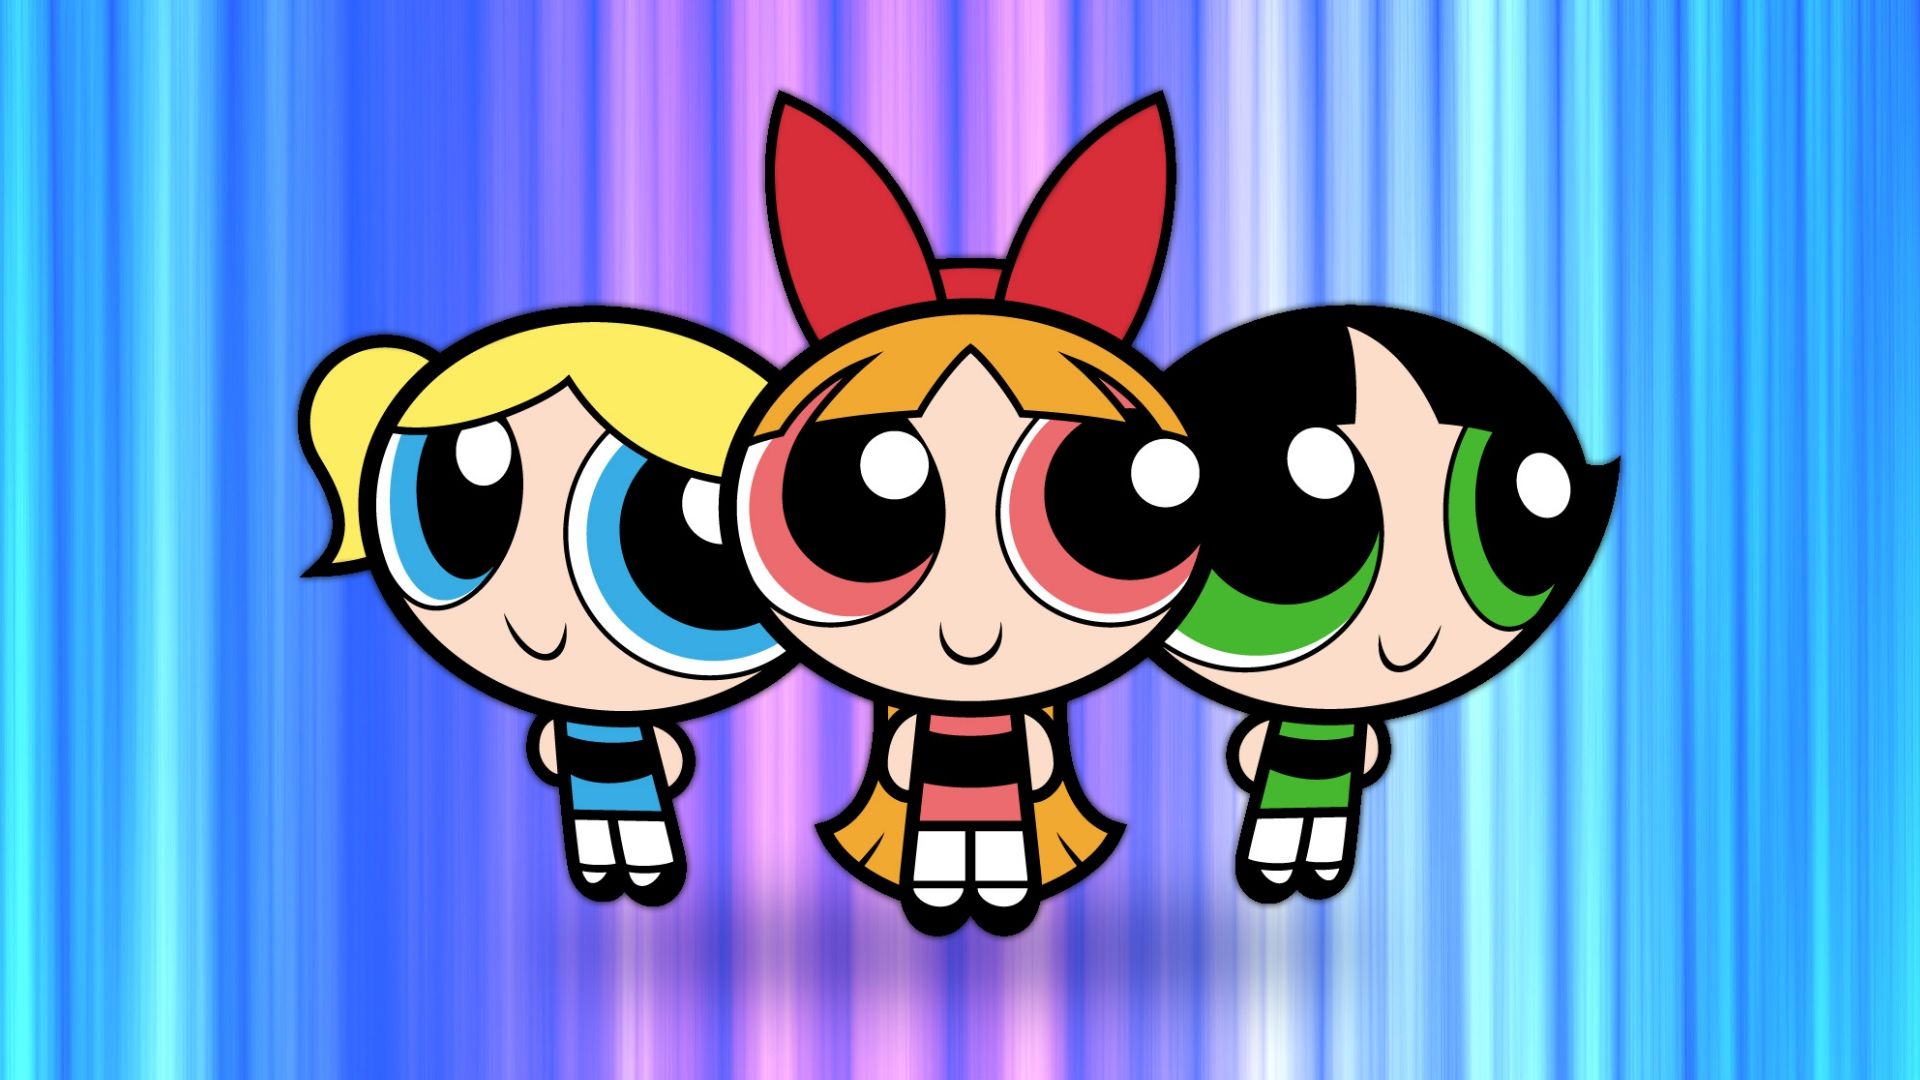 Free Download The PowerPuff Girls 2016 Images #864 Wallpapers ...